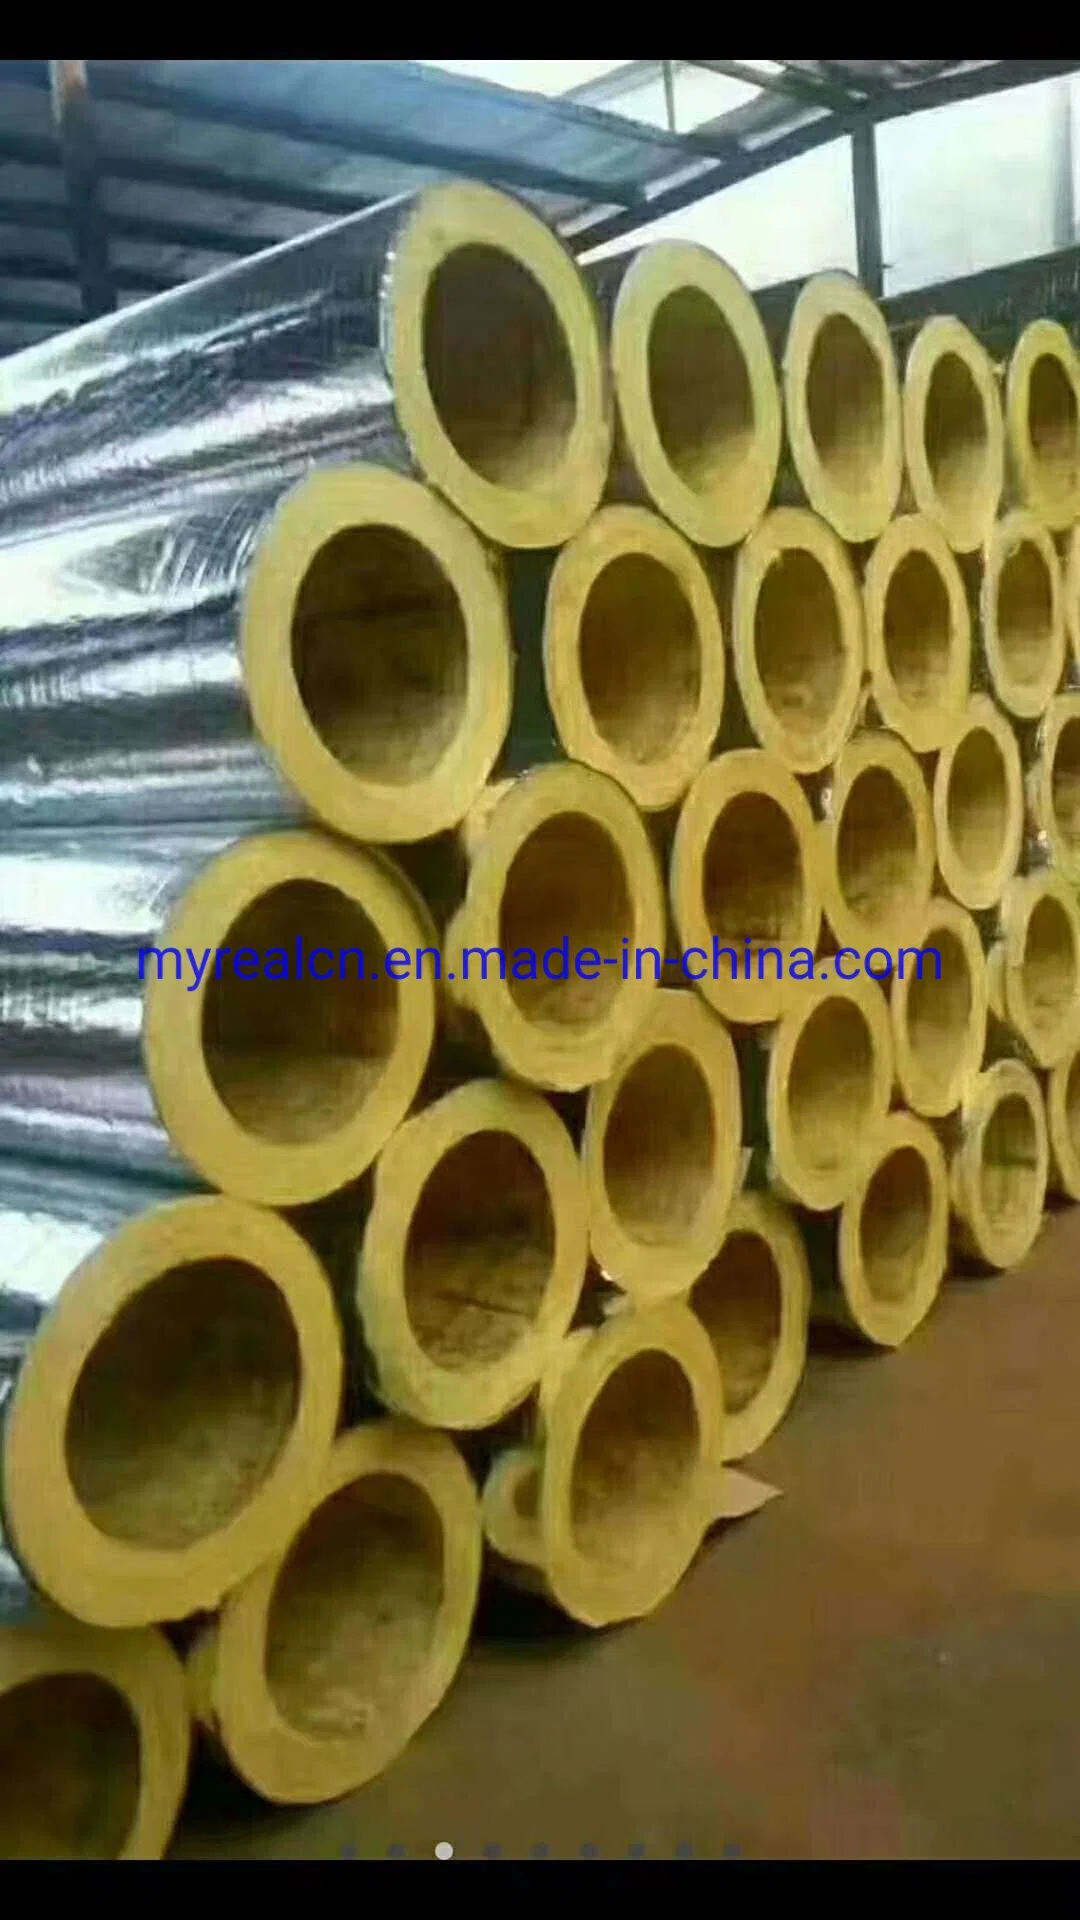 Glass Wool Insulation Heat Resistant Rock Wool Tube with Aluminum Foil